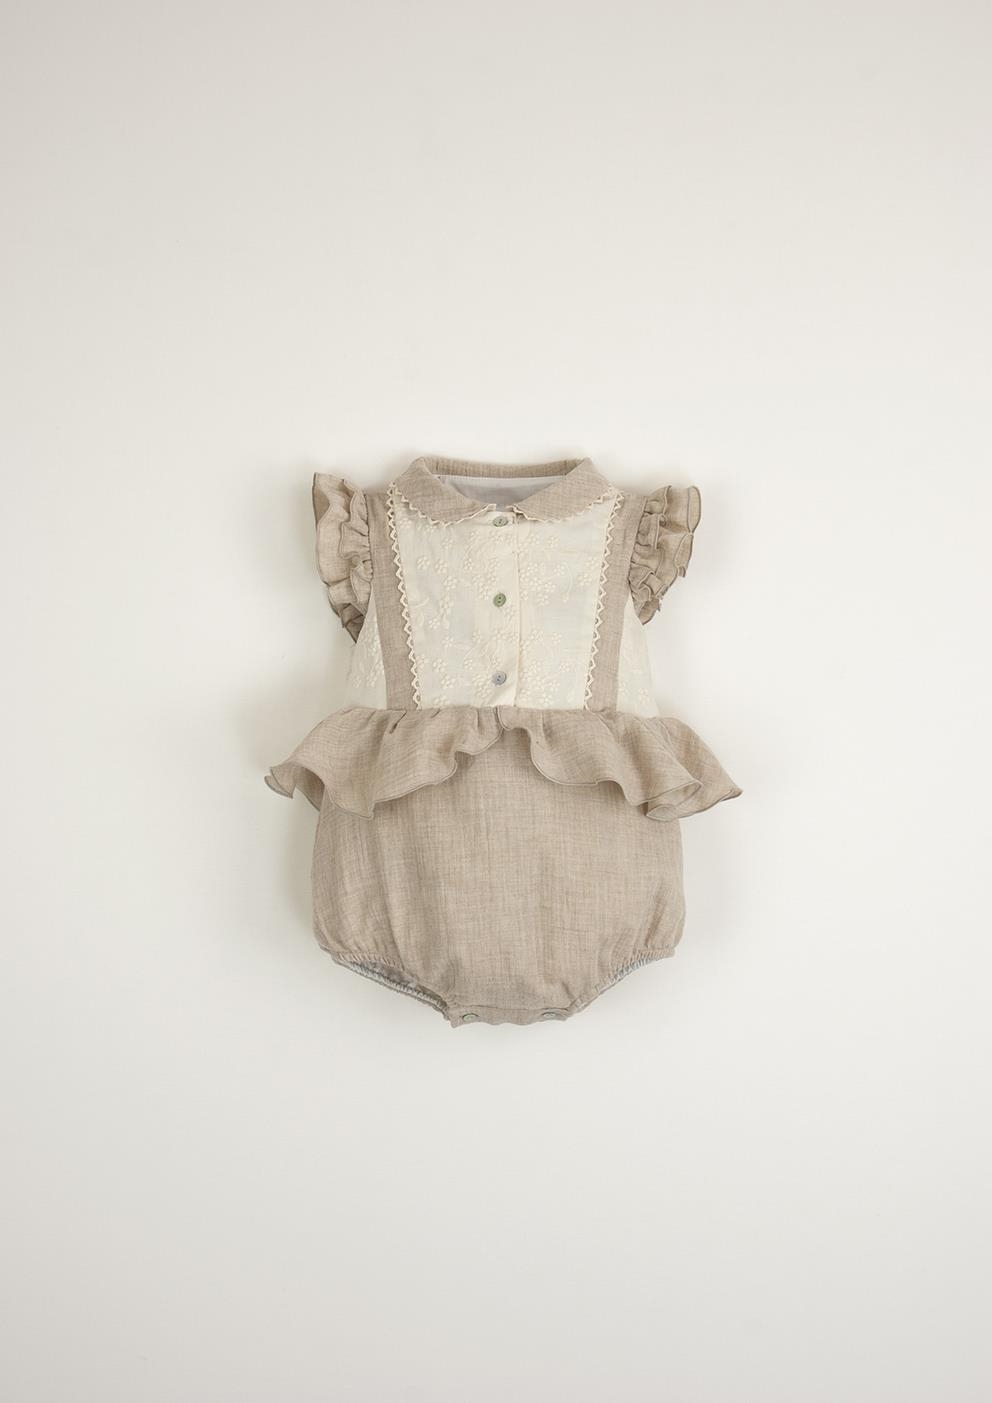 Mod.8.4 Organic sand romper suit with collar | SS23 Mod.8.4 Organic sand romper suit with collar